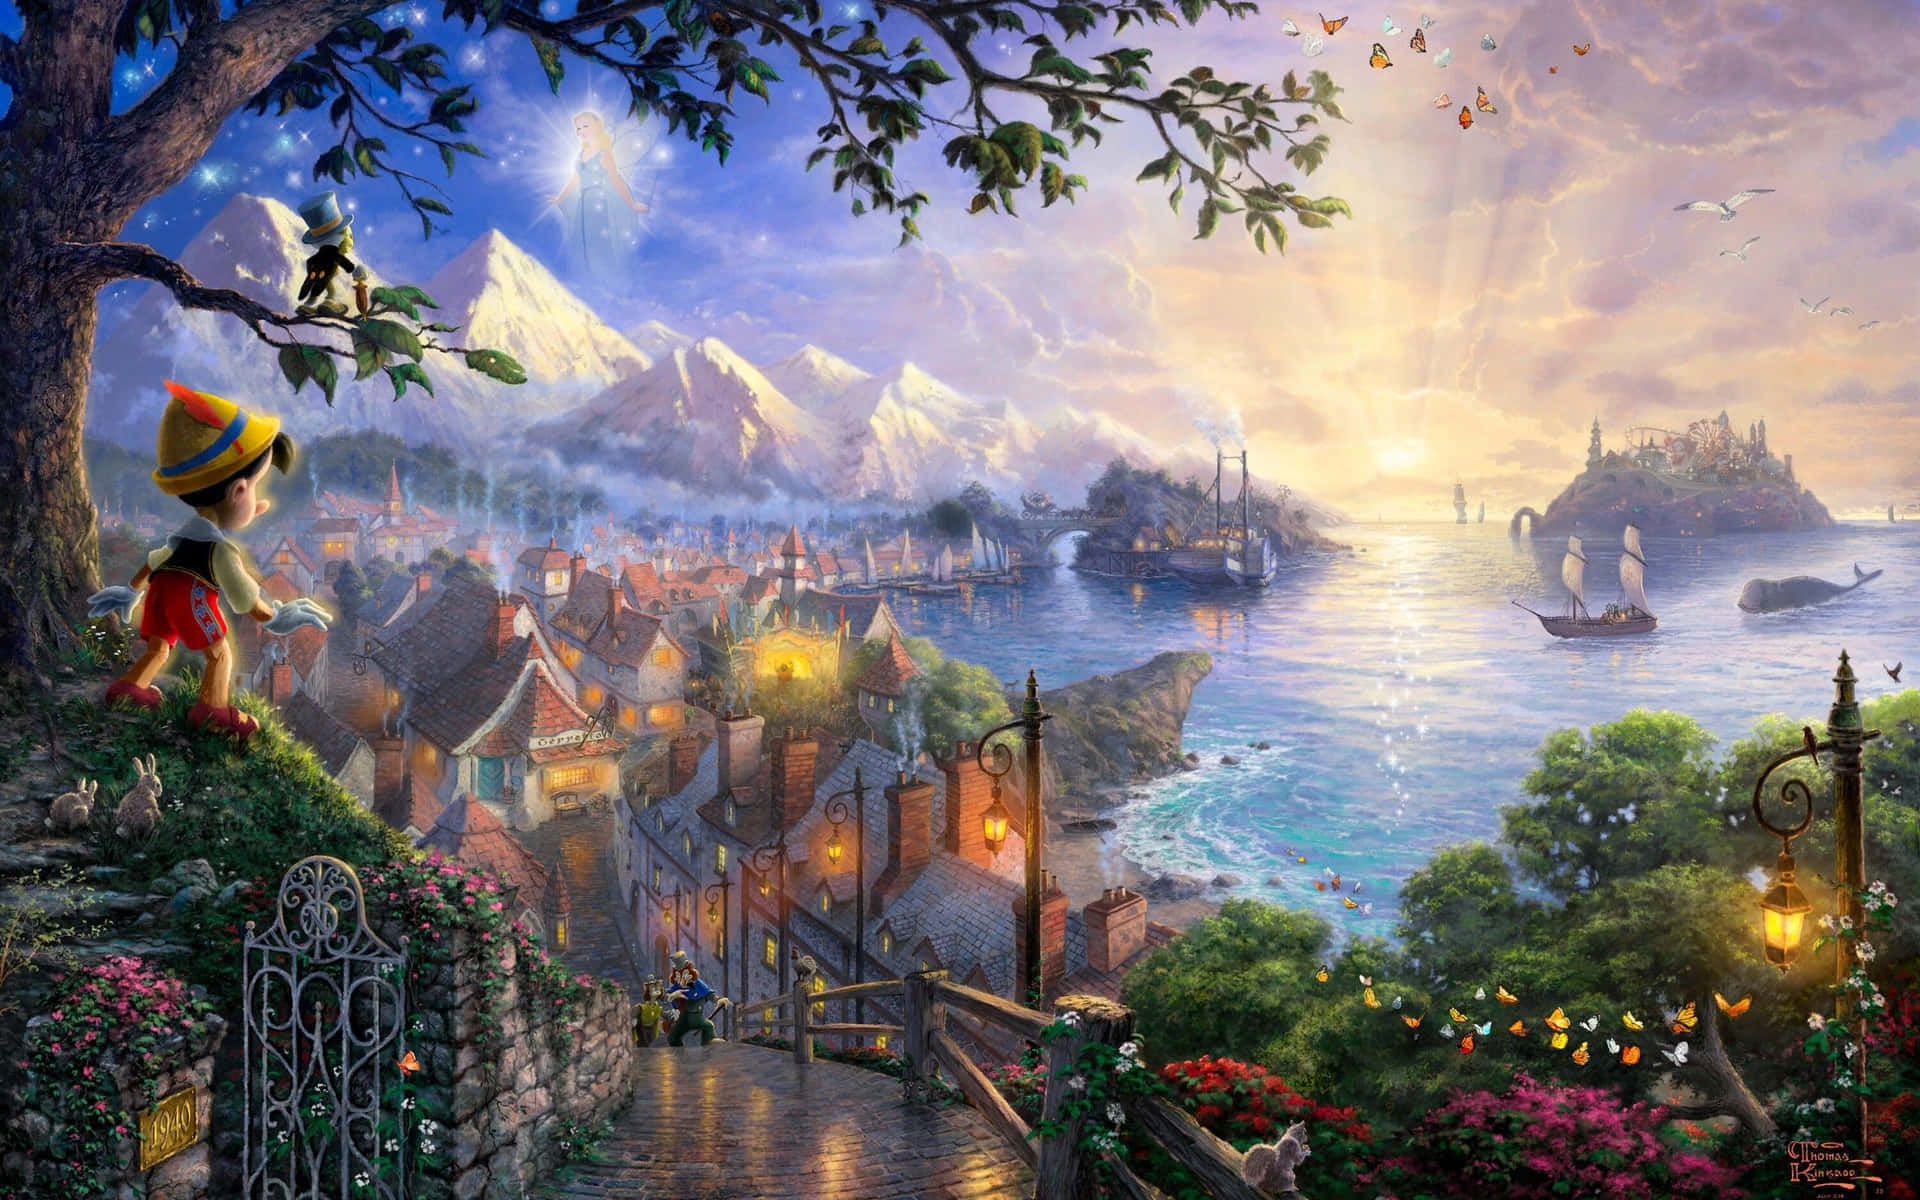 Tải xuống APK Fairy Tale Wallpaper cho Android